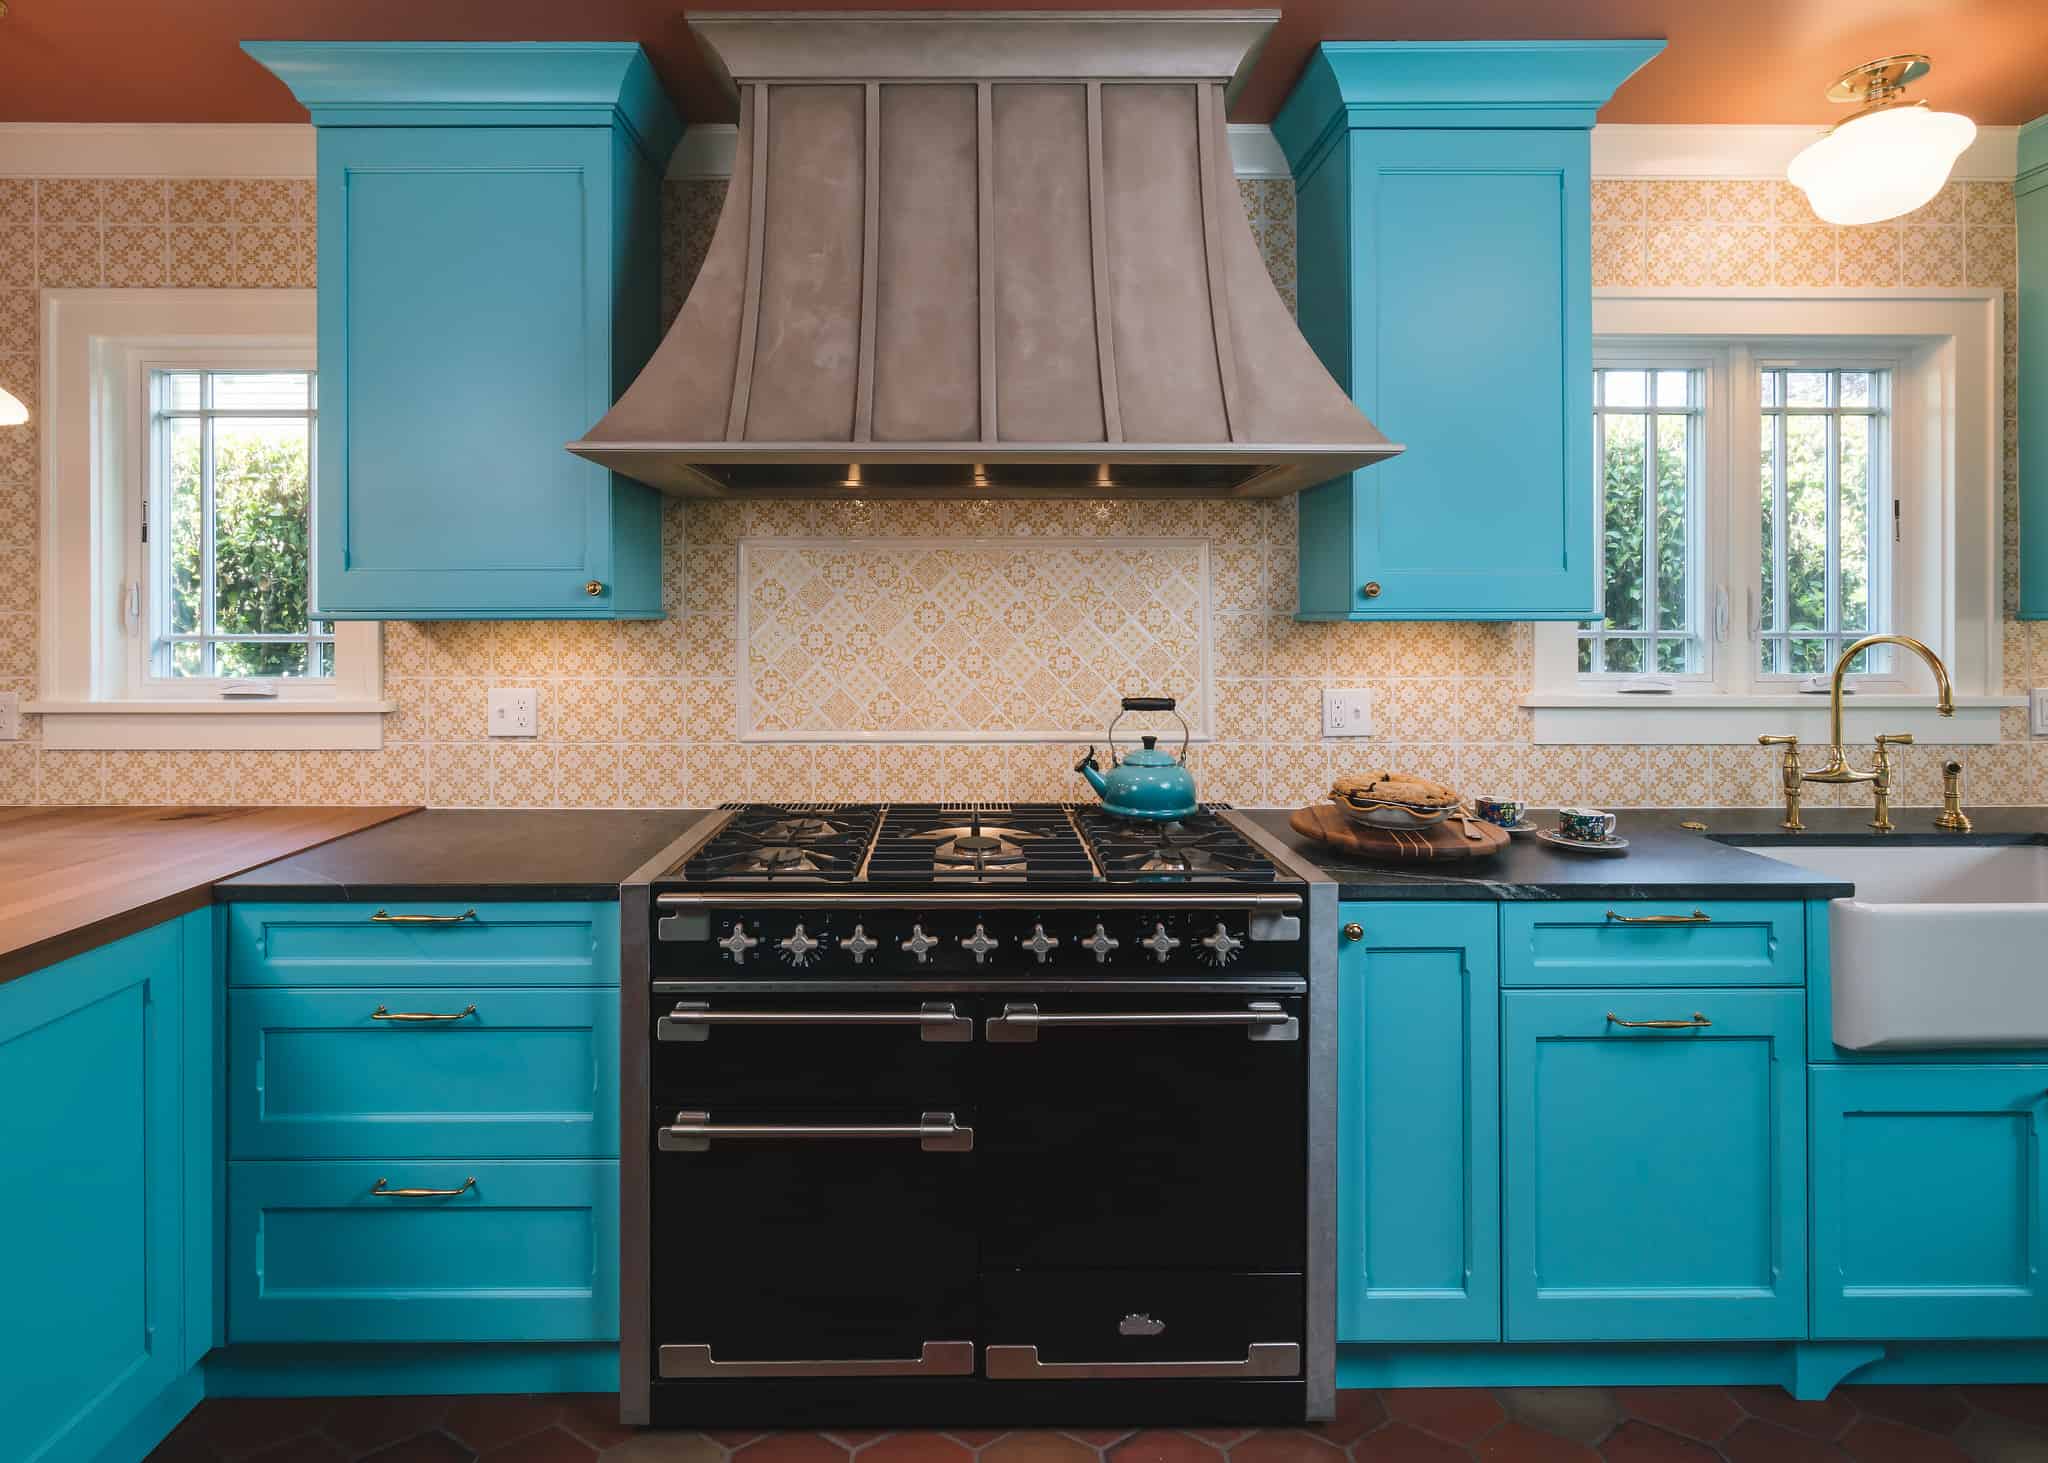 Range Hoods: The Unsung Heroes of the Kitchen - Neil Kelly